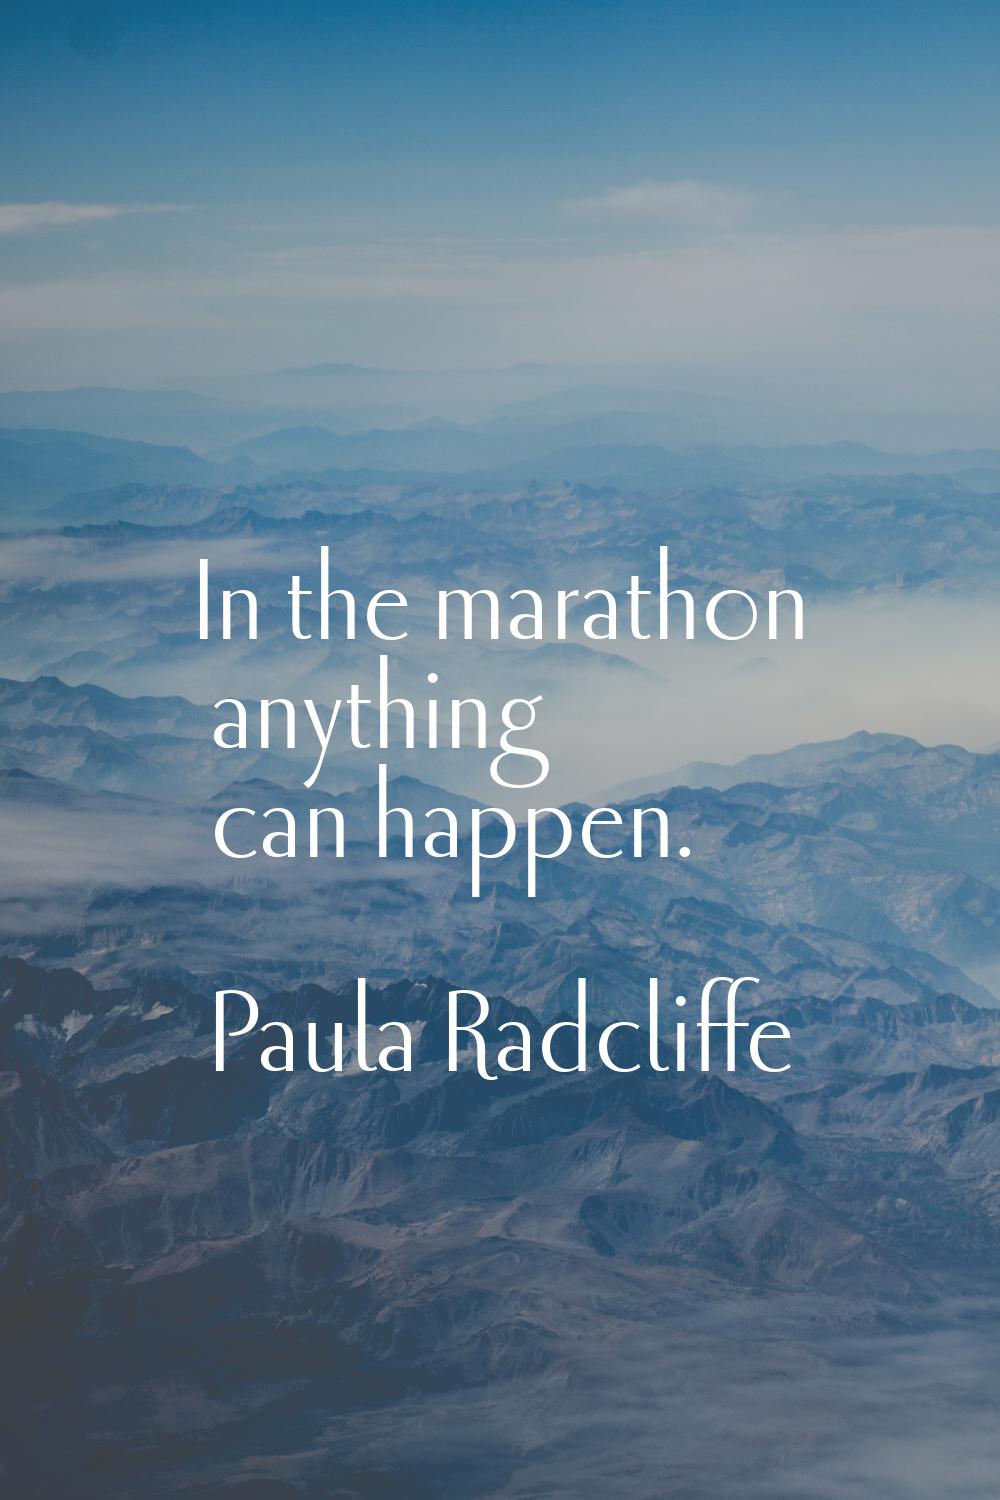 In the marathon anything can happen.